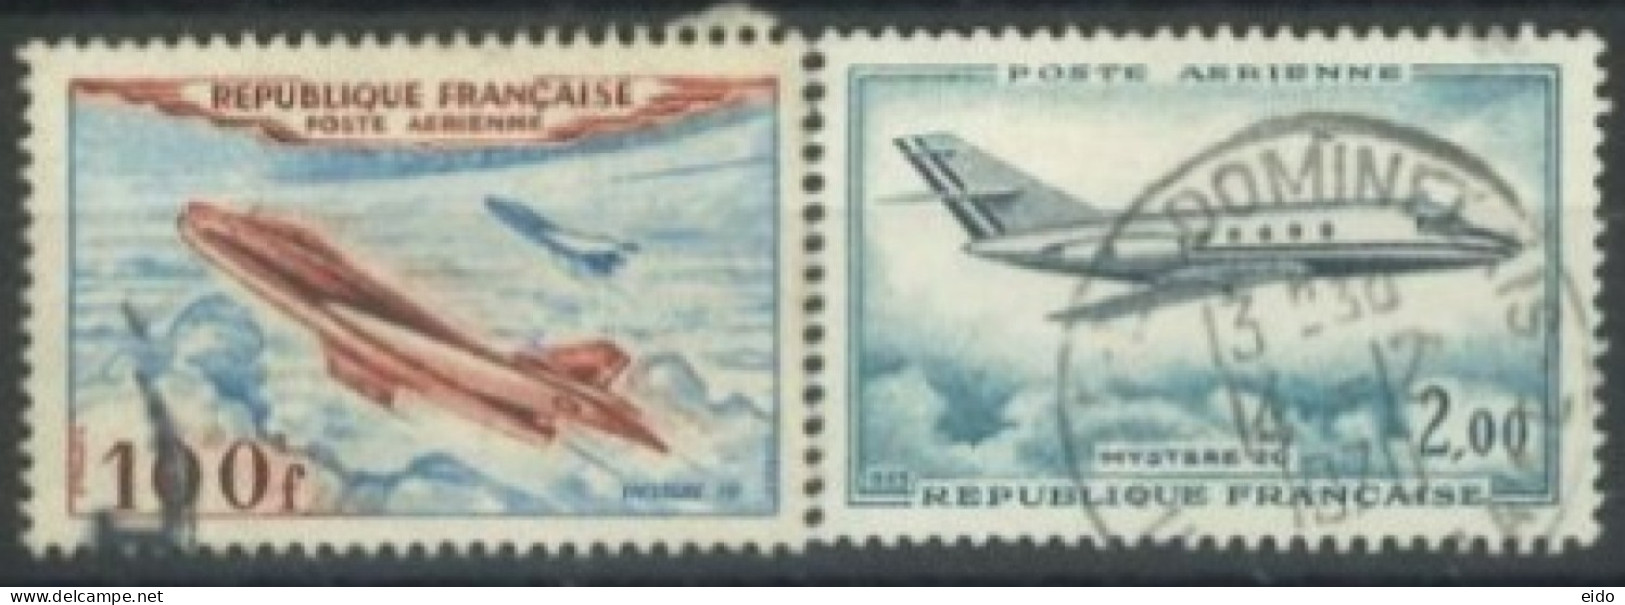 FRANCE - 1954/65 - AIR PLANES STAMPS SET OF 2, USED - Gebraucht